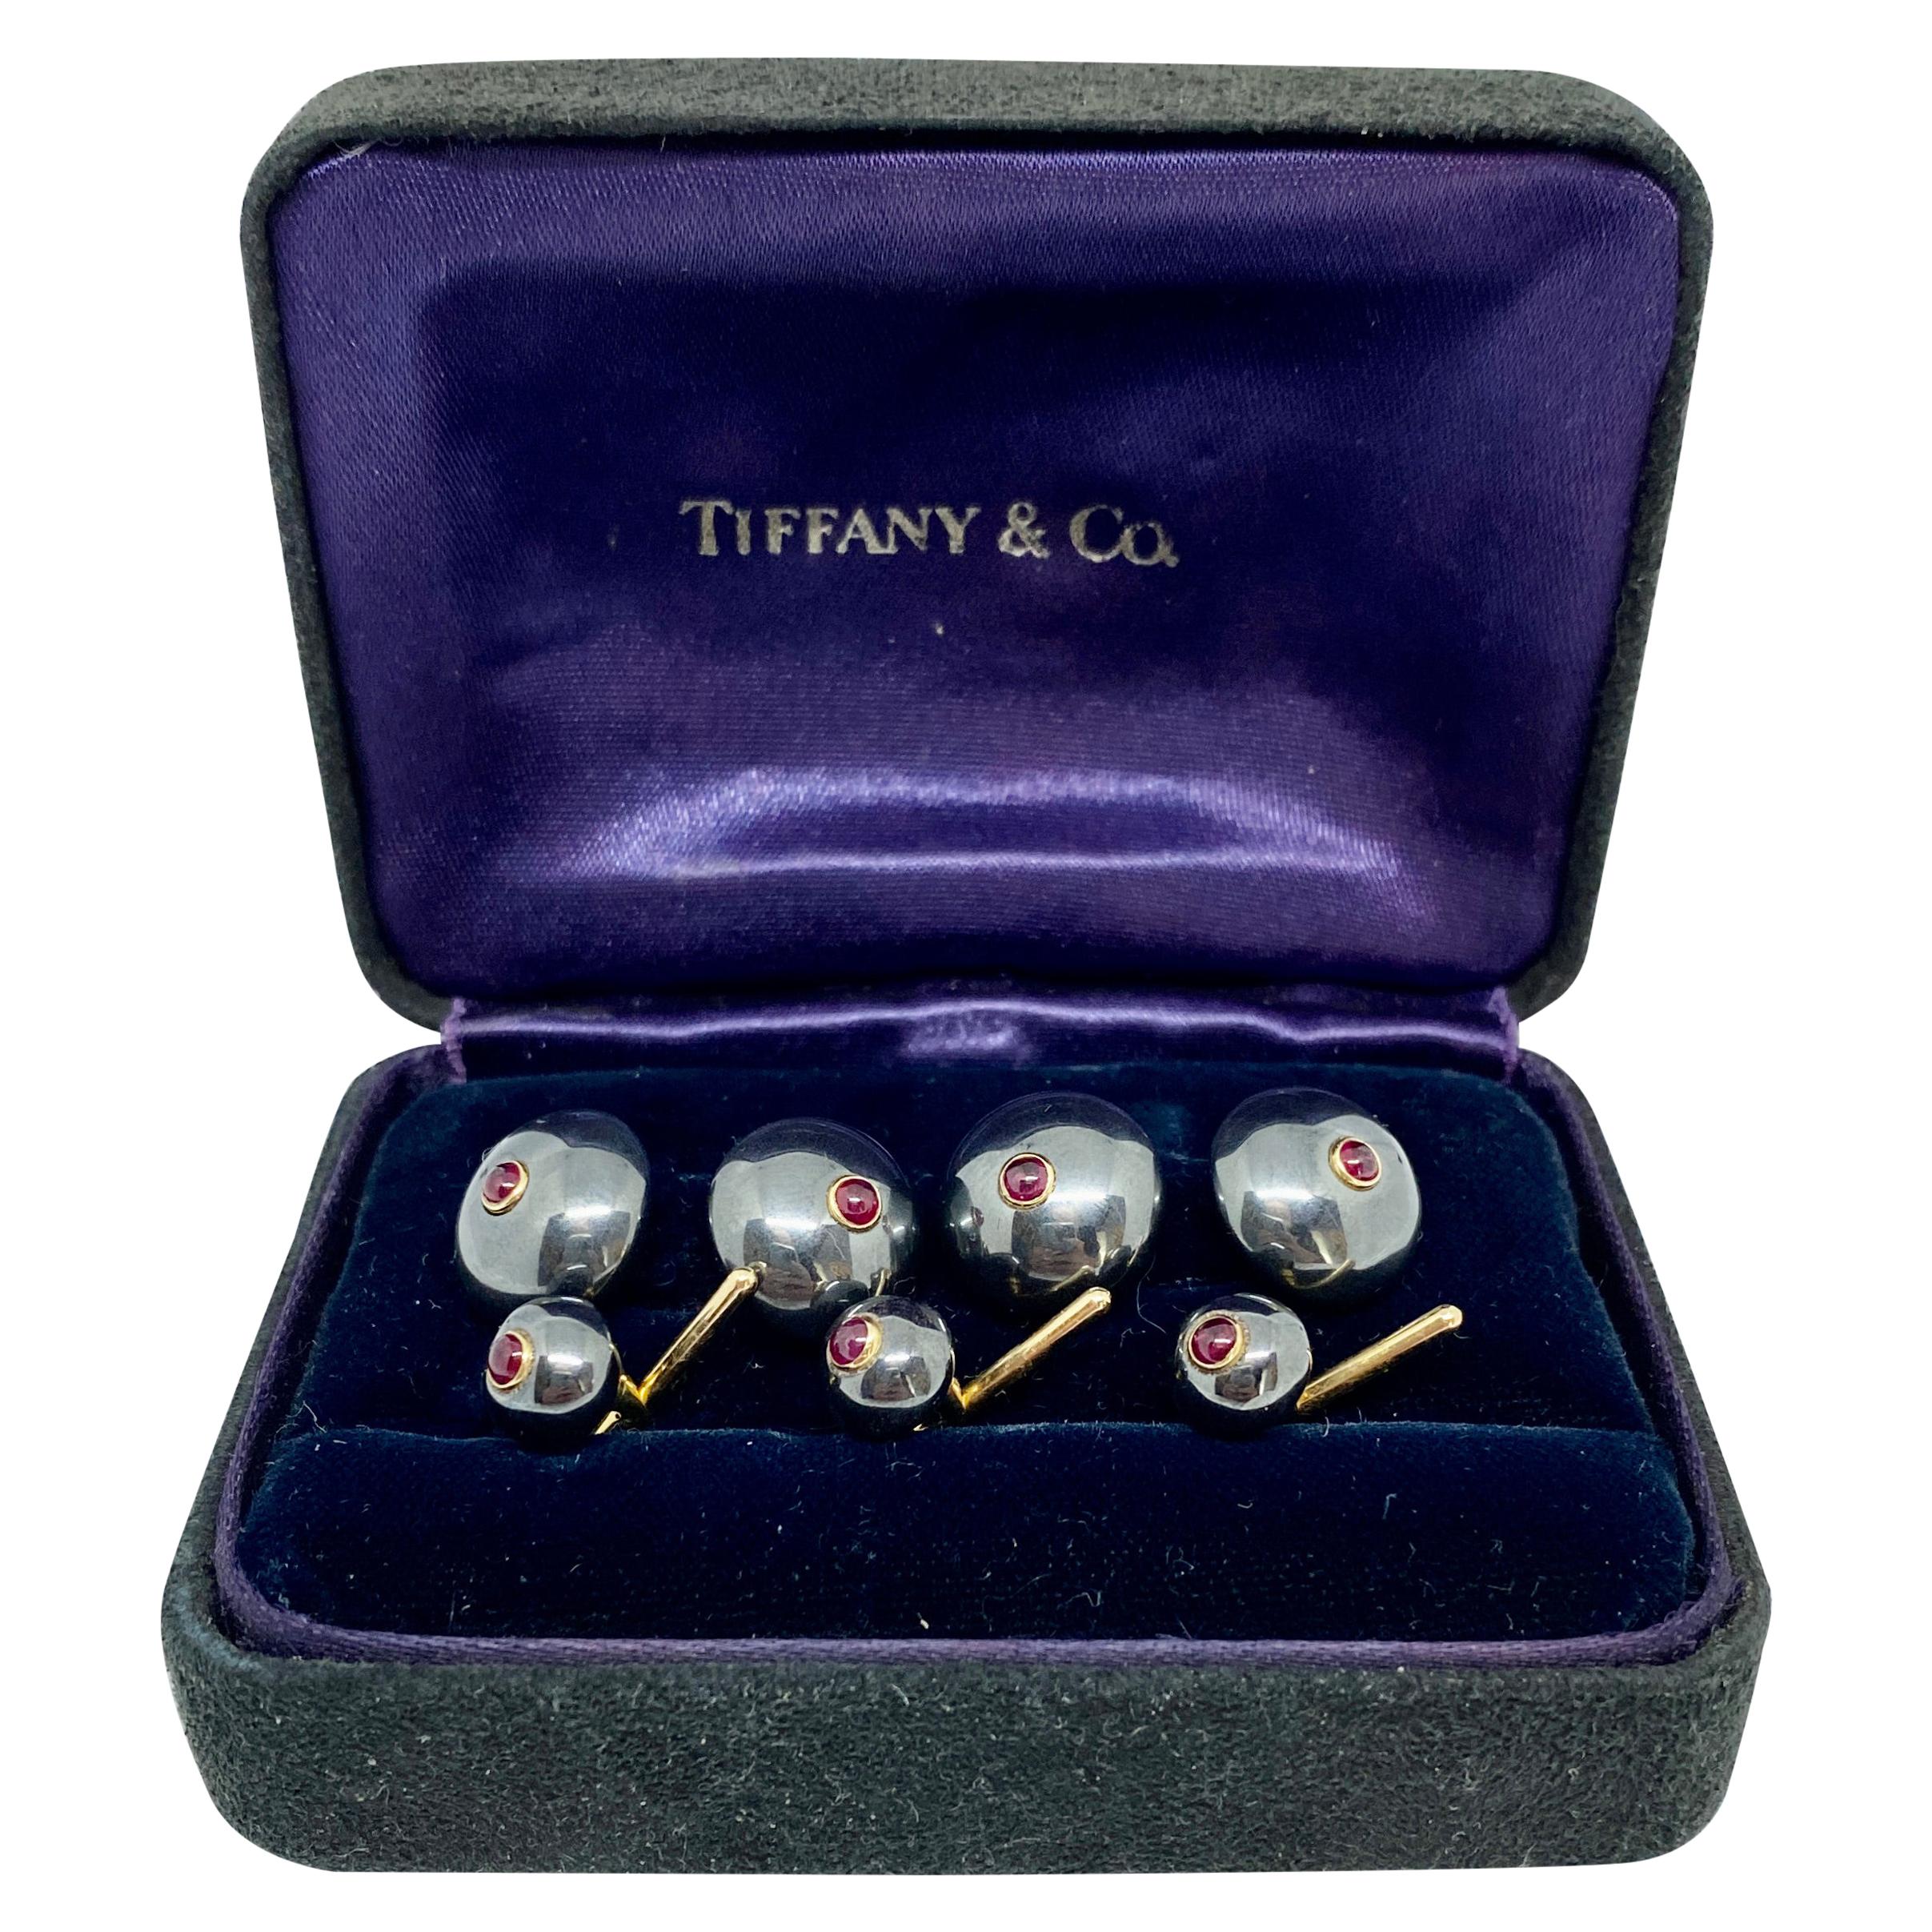 Tiffany & Co. Cufflinks and Studs, Hematites with Rubies Set in Yellow Gold